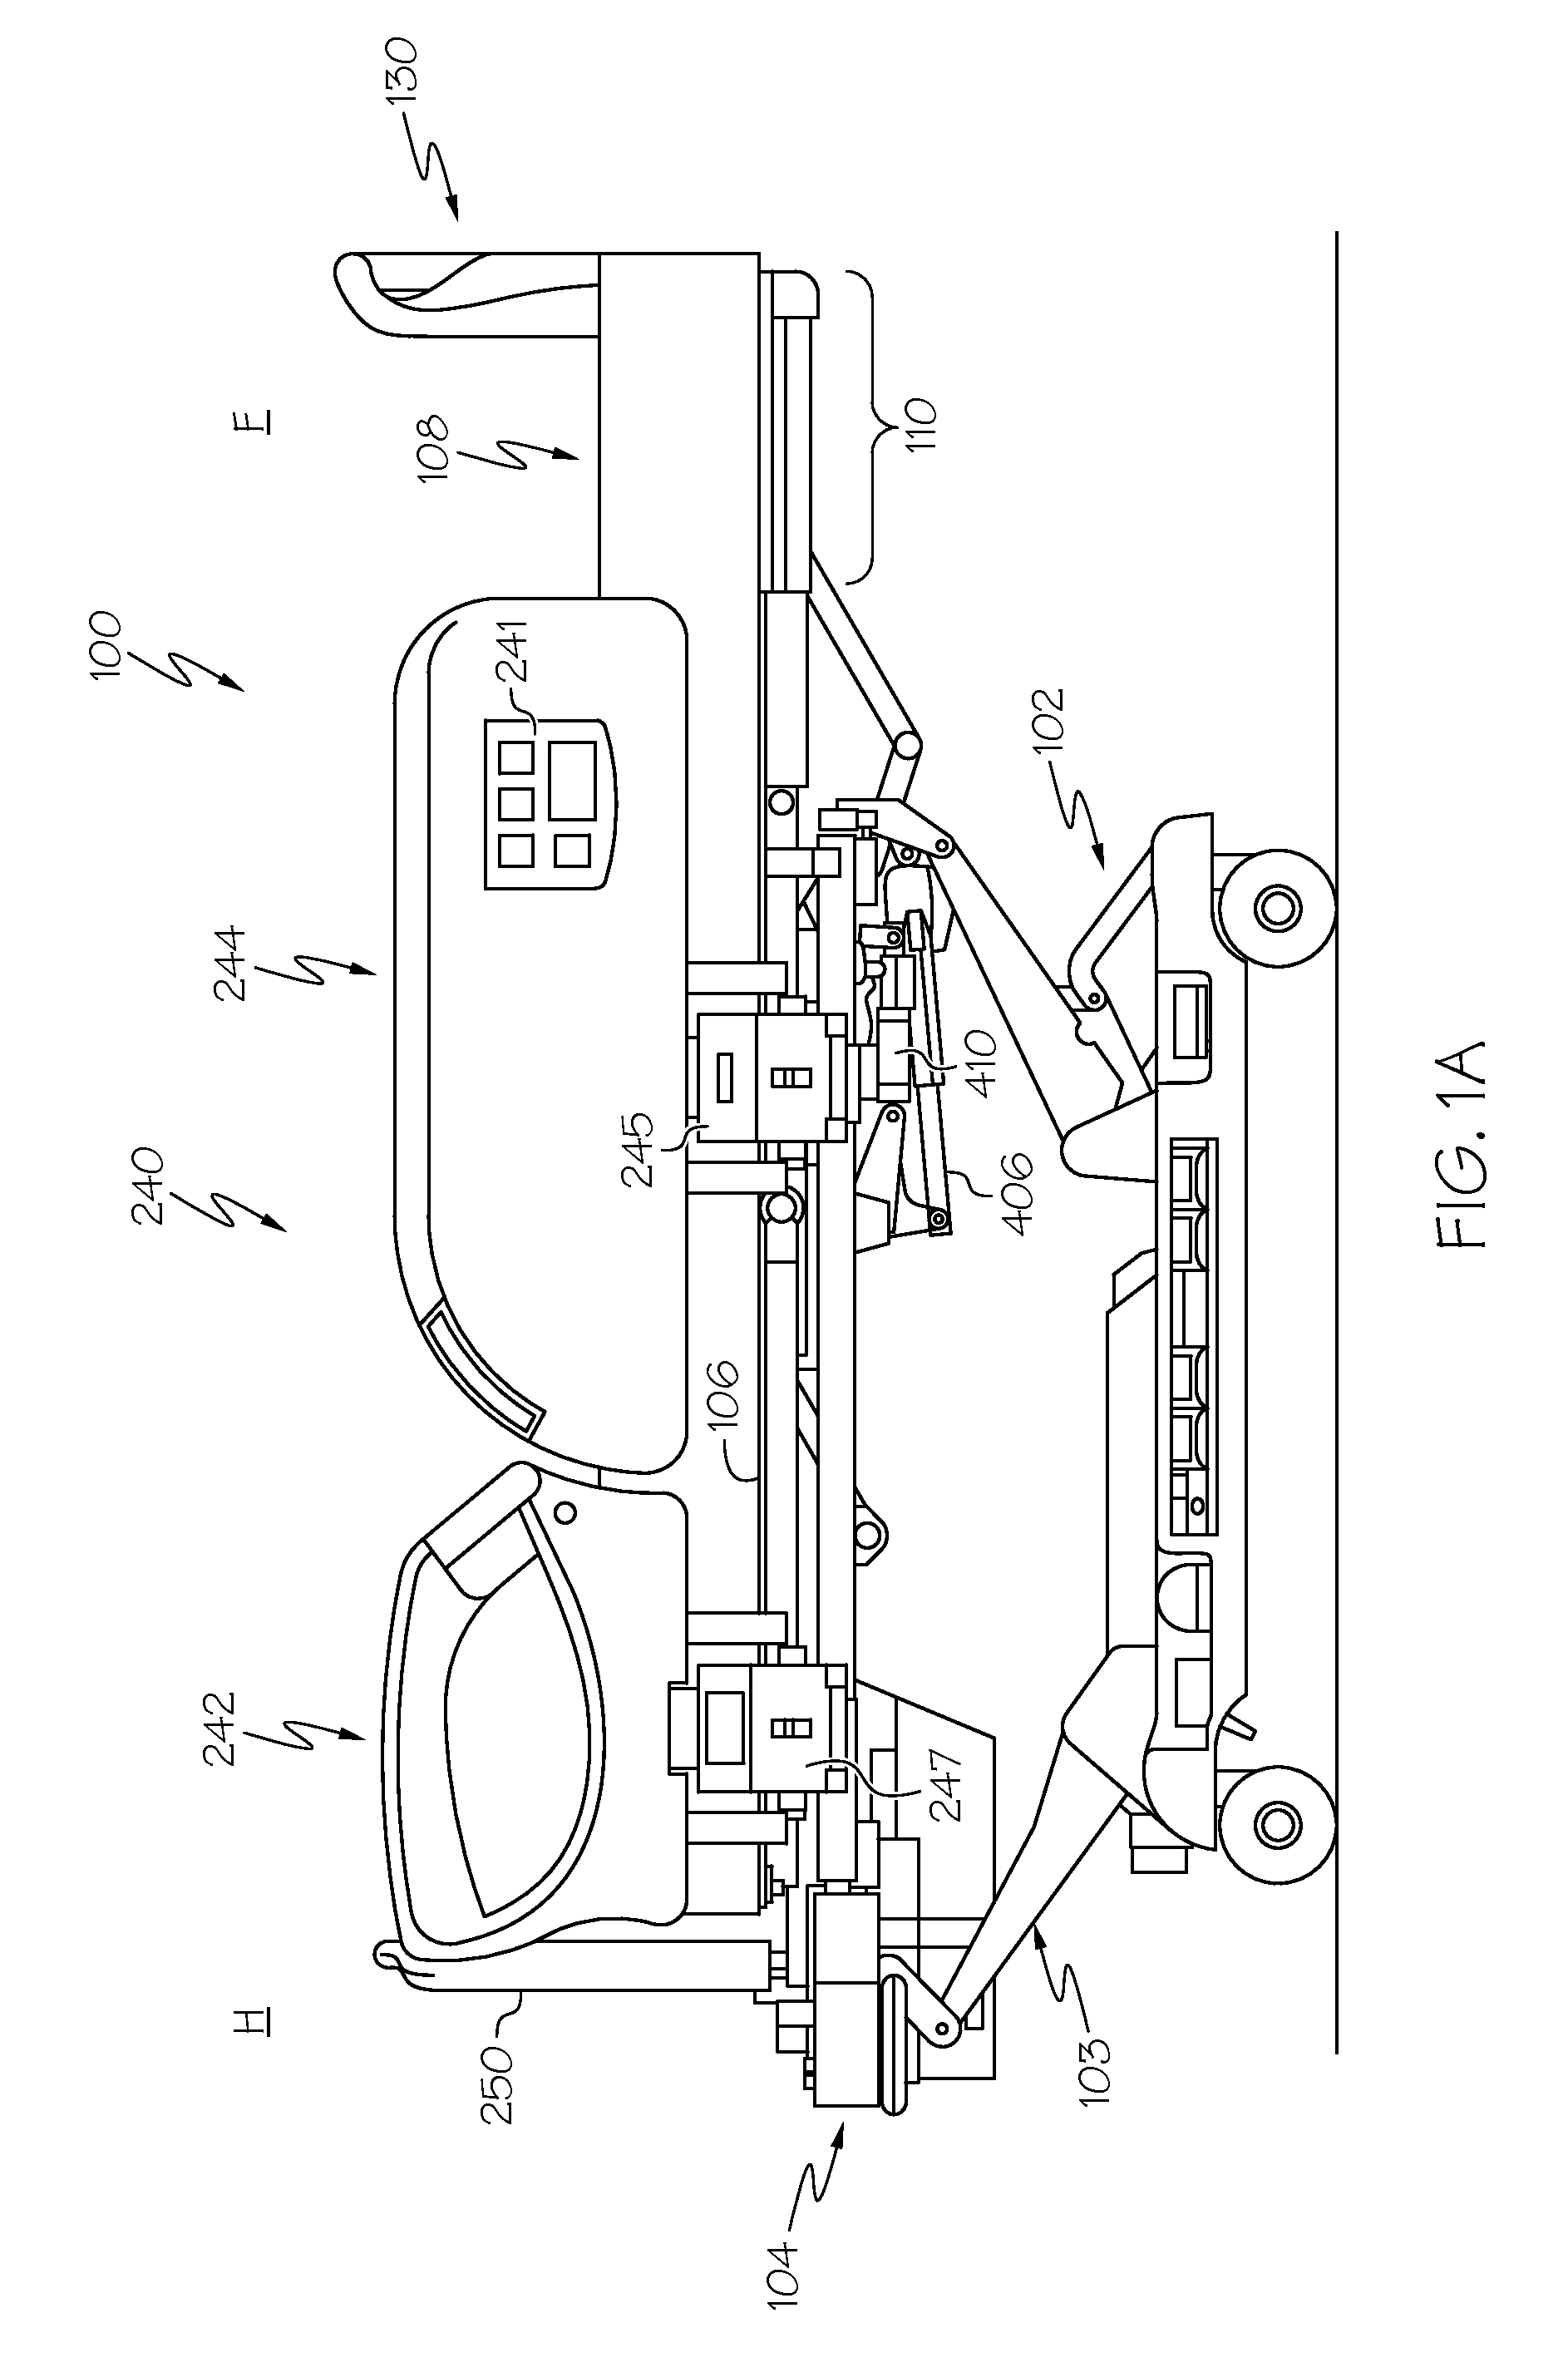 Person support apparatuses with selectively coupled foot sections